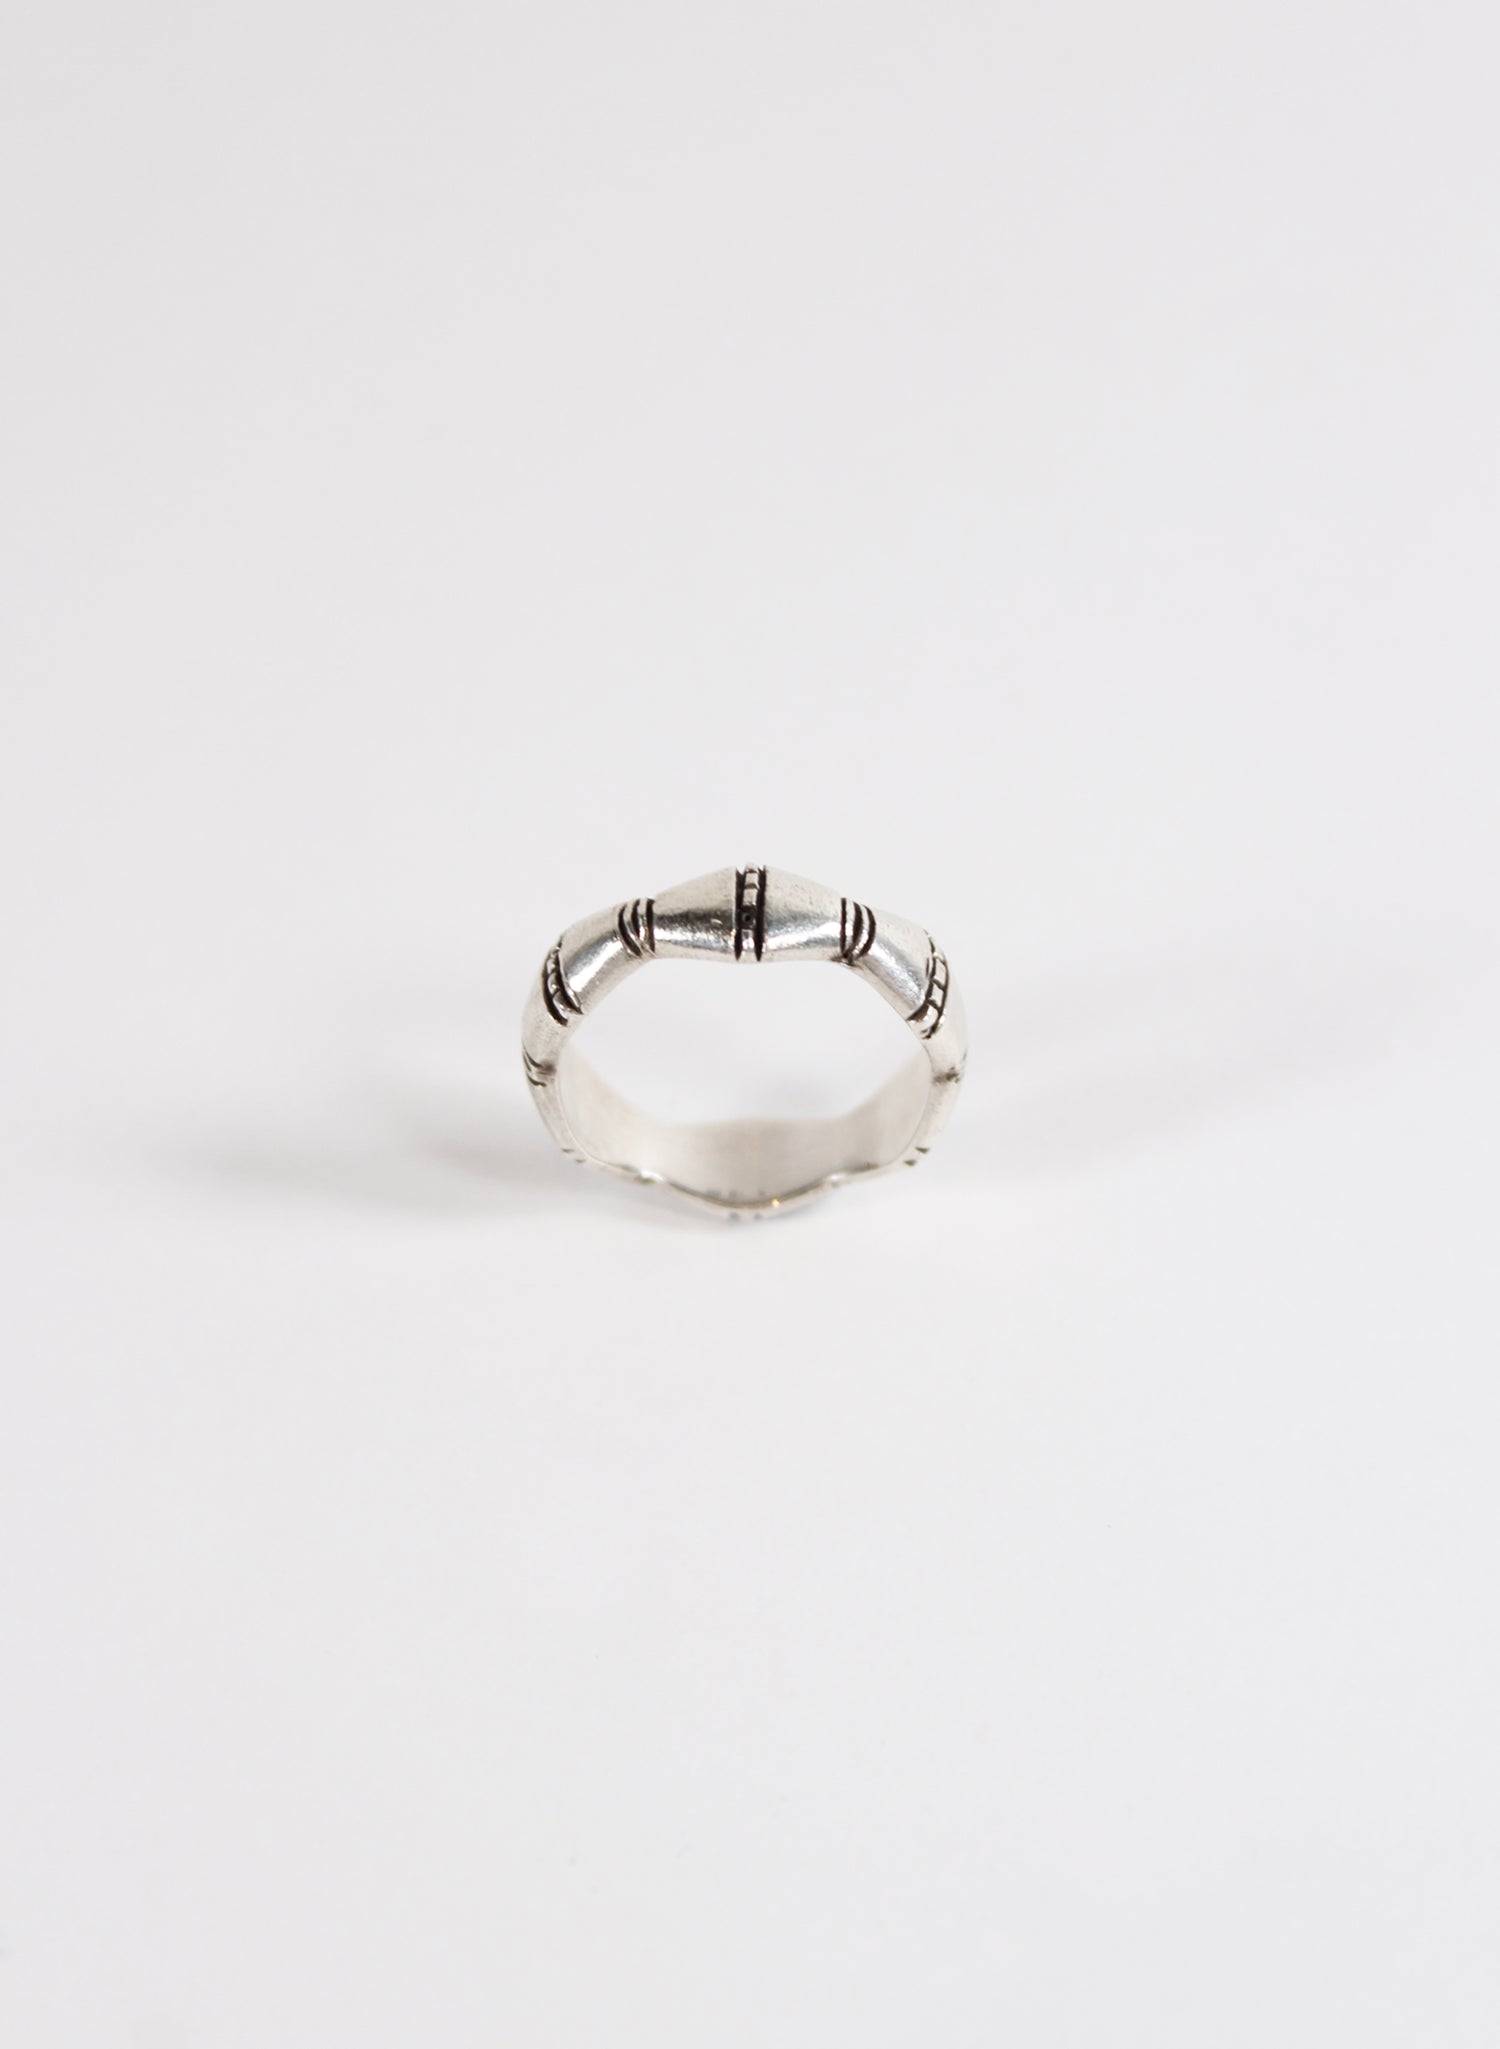 Archaic Reels Ring - Sterling Silver